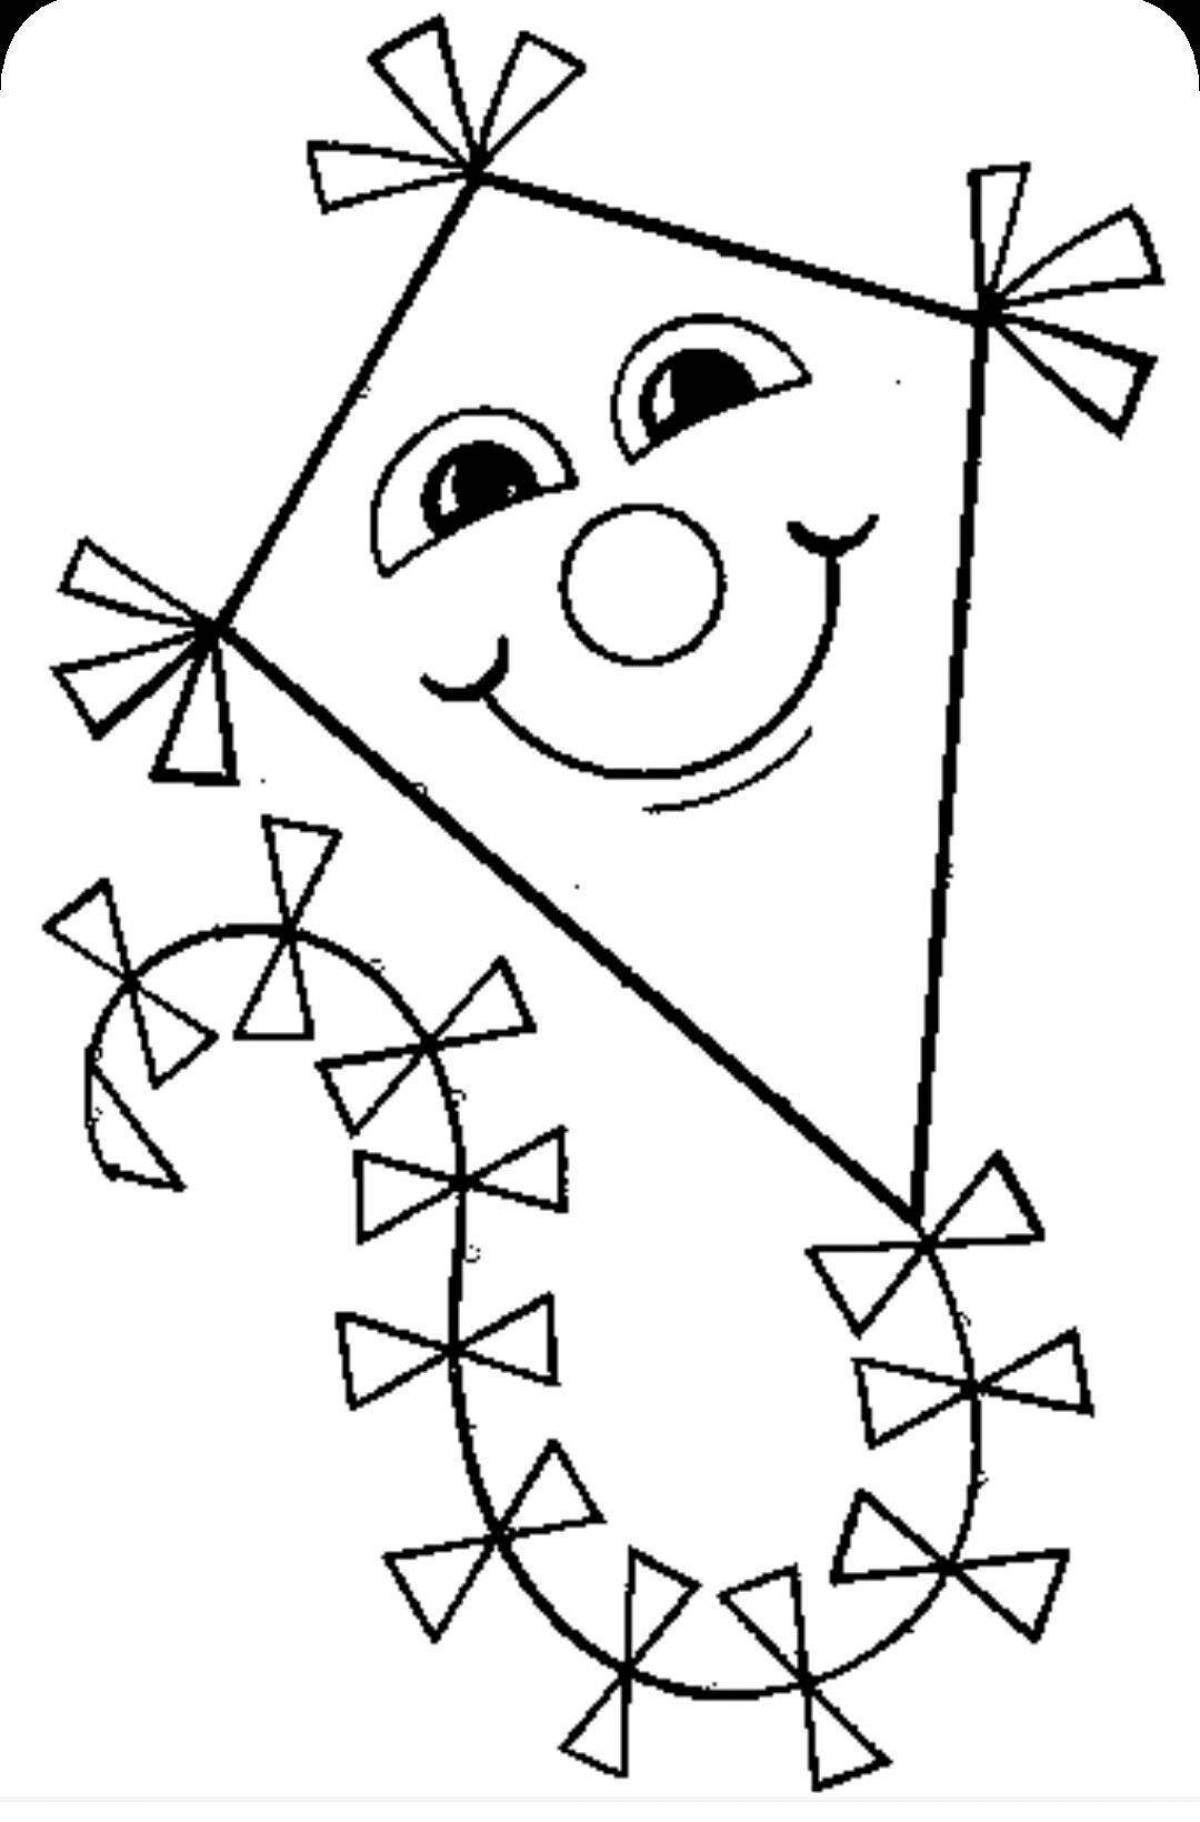 Color-explosion kite coloring page for kids